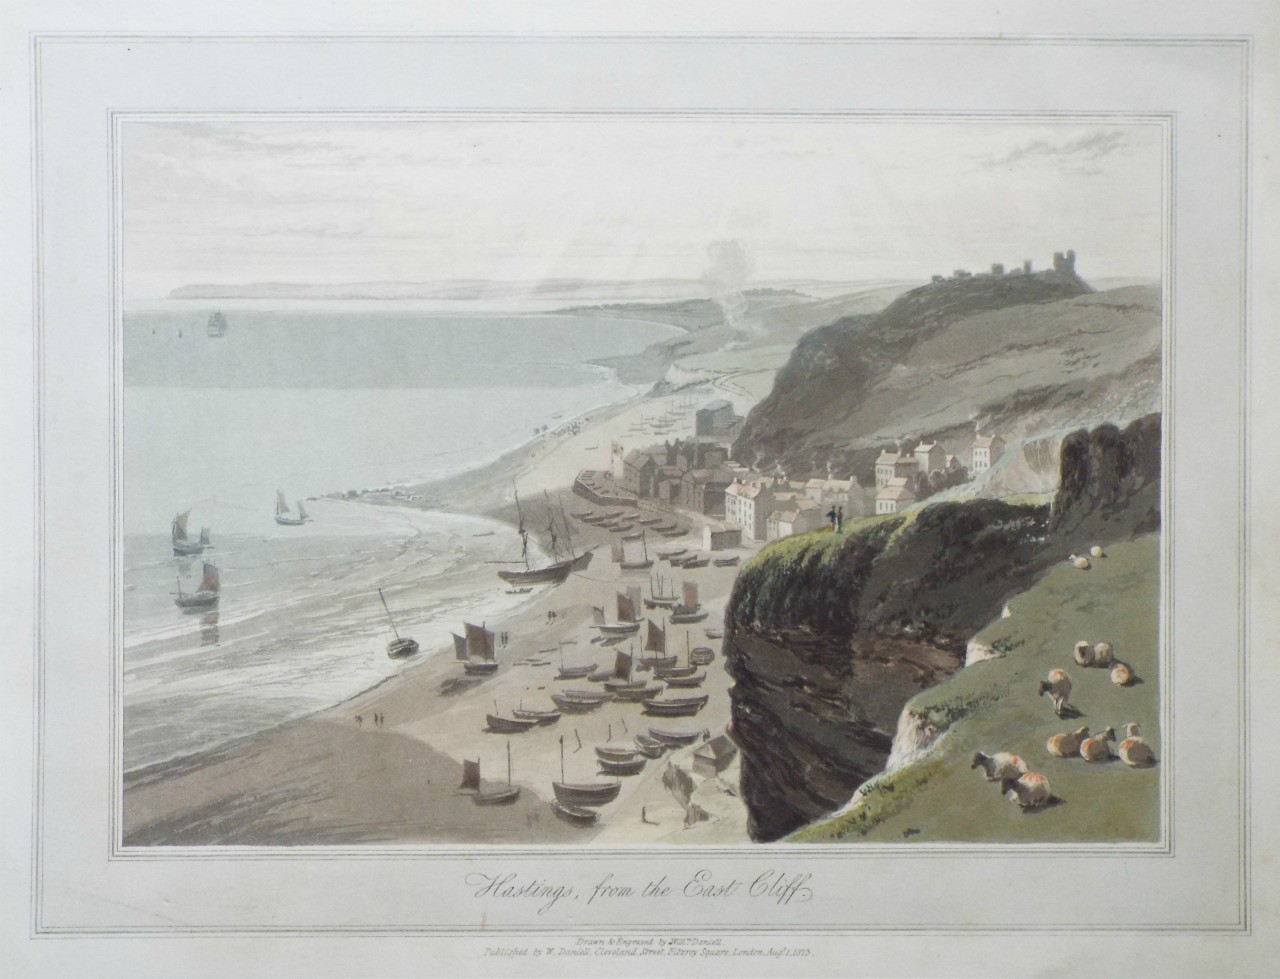 Aquatint - Hastings, from the East Cliff. - Daniell